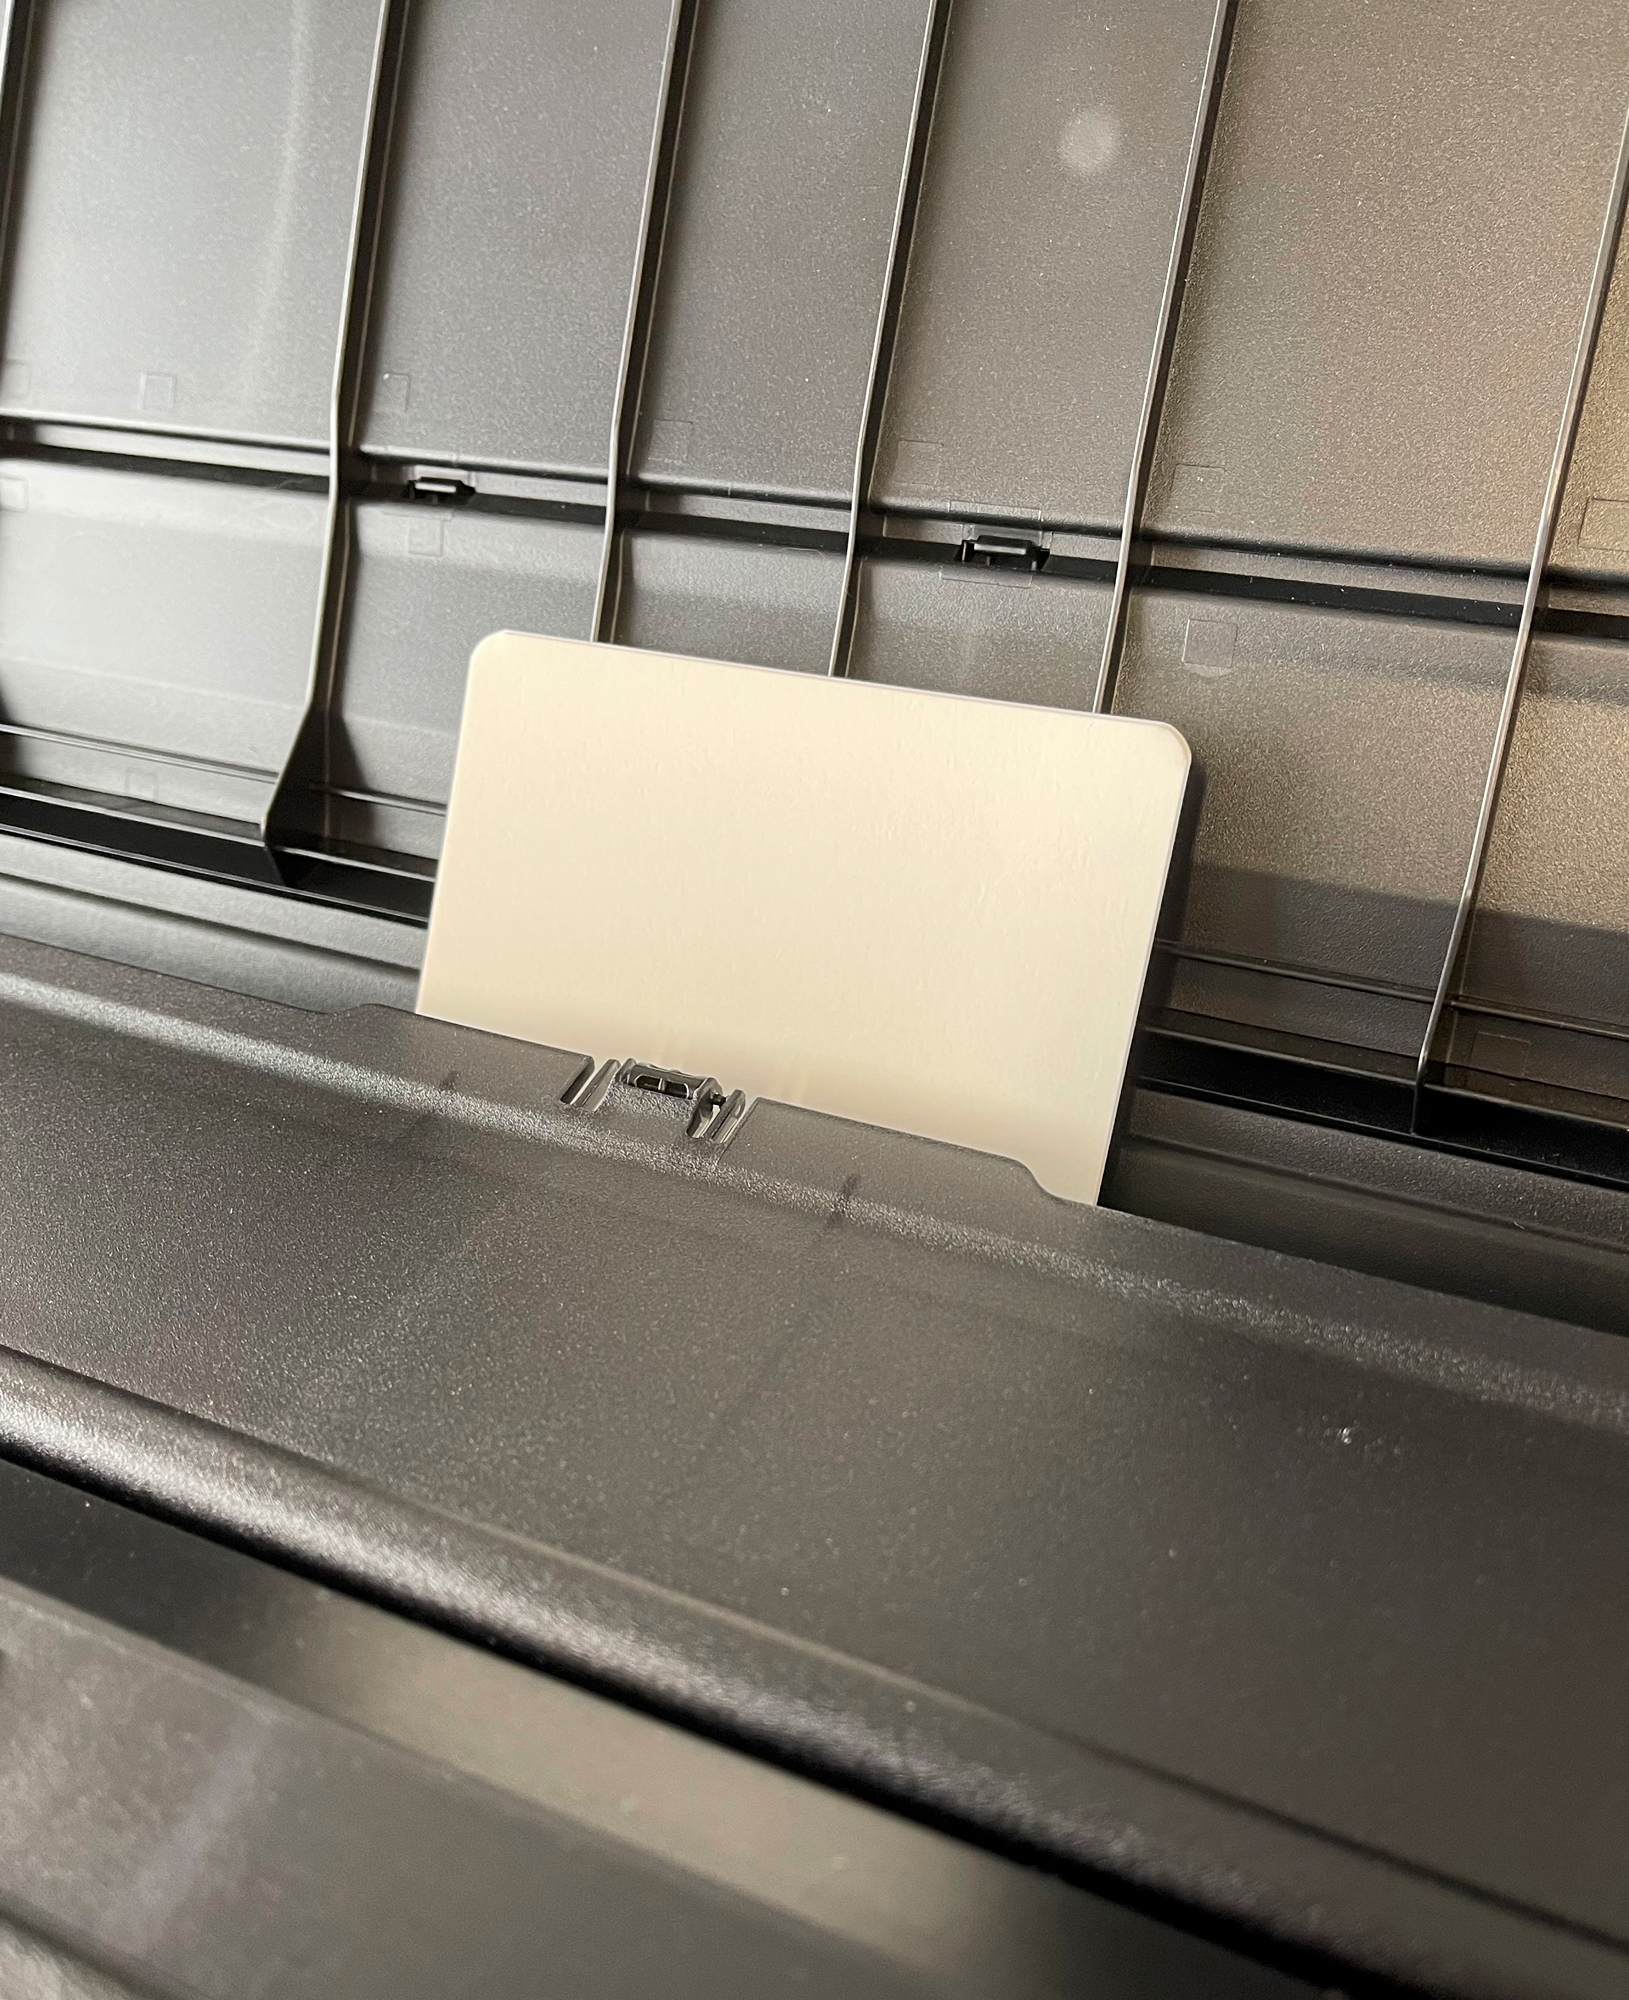 The paper as it sits in the printer feed tray